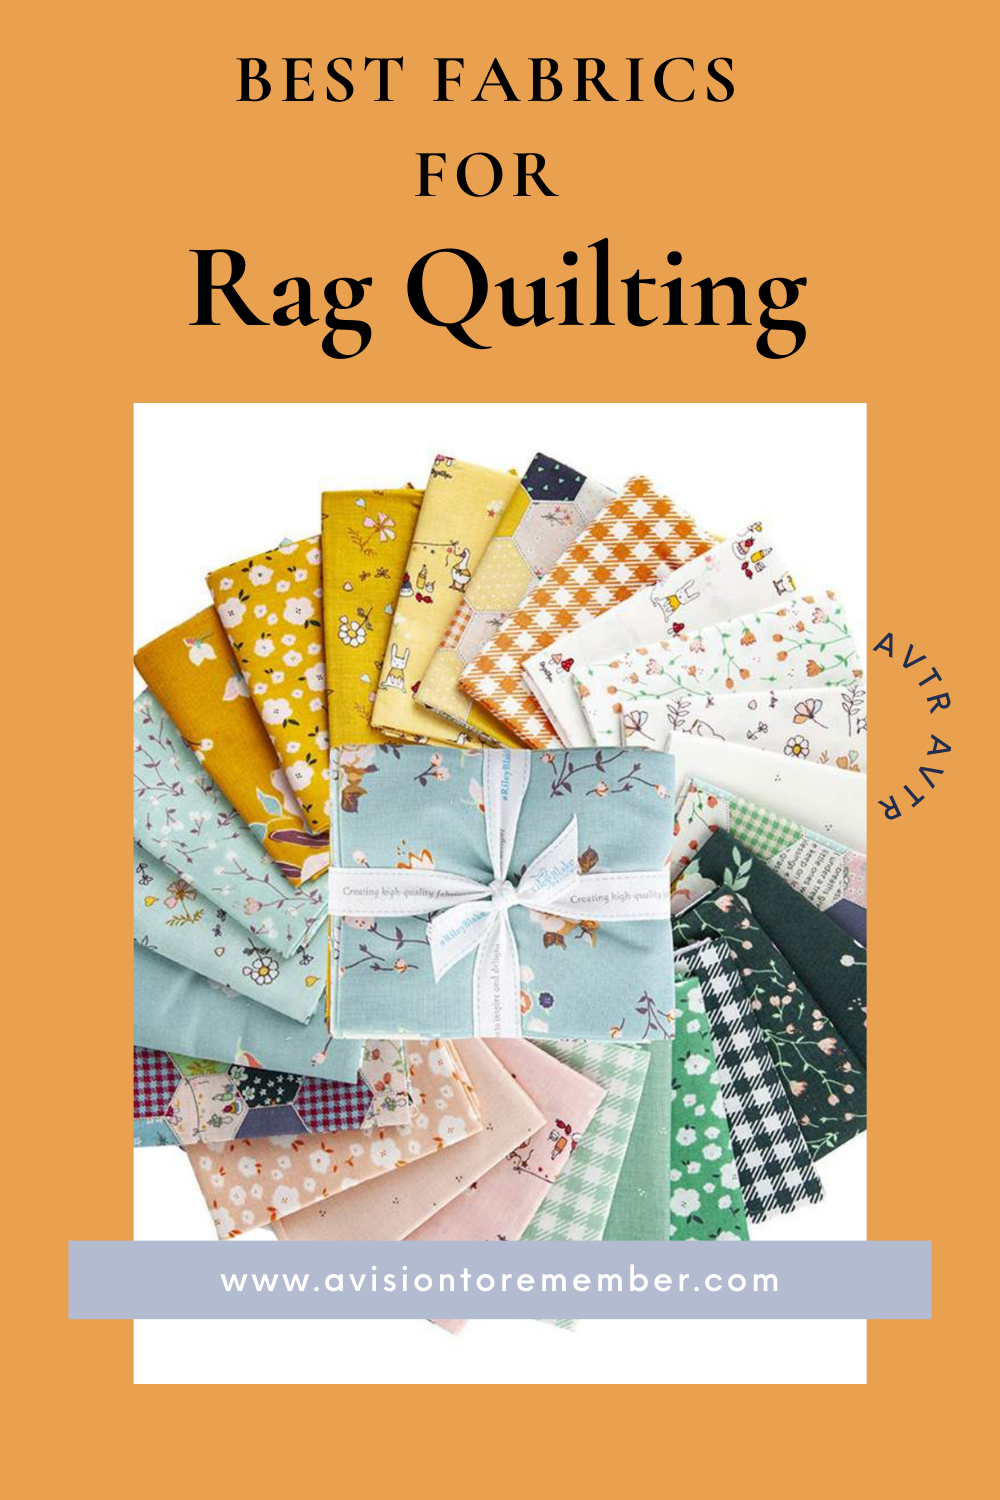 A Vision to Remember All Things Handmade Blog: Best Fabrics for Rag Quilts